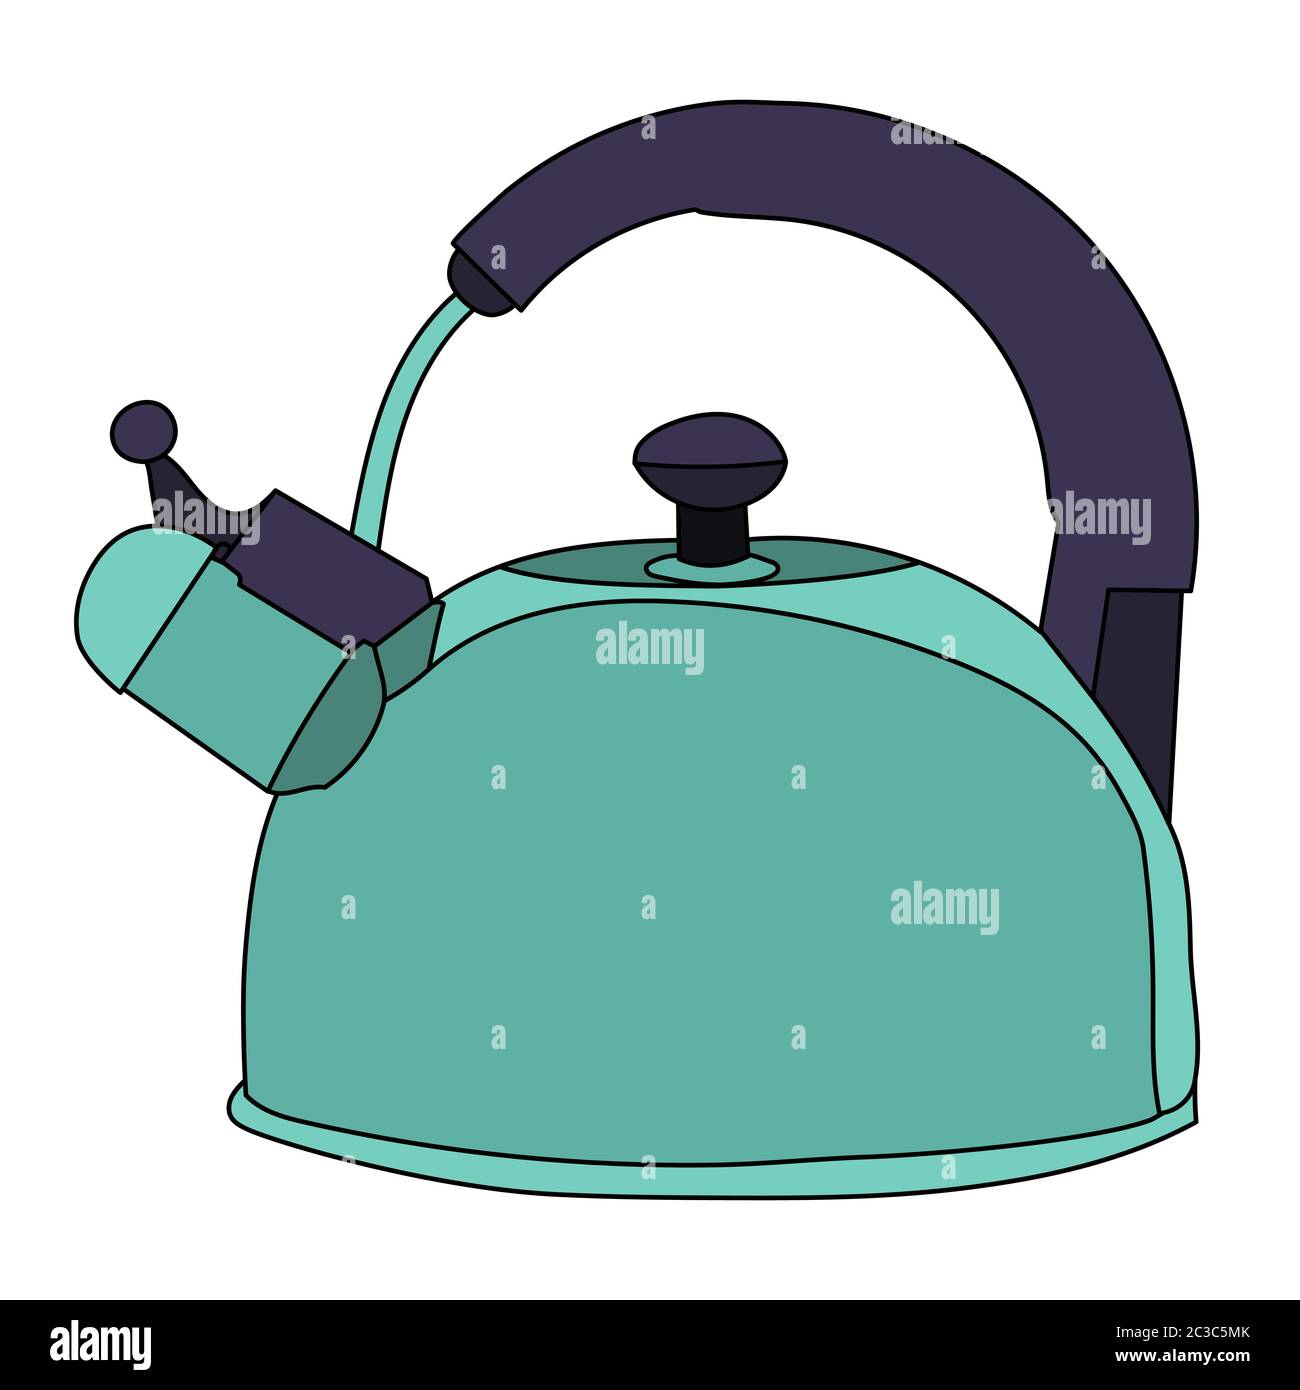 https://c8.alamy.com/comp/2C3C5MK/white-background-a-kettle-with-a-handle-for-a-stove-with-a-whistle-2C3C5MK.jpg